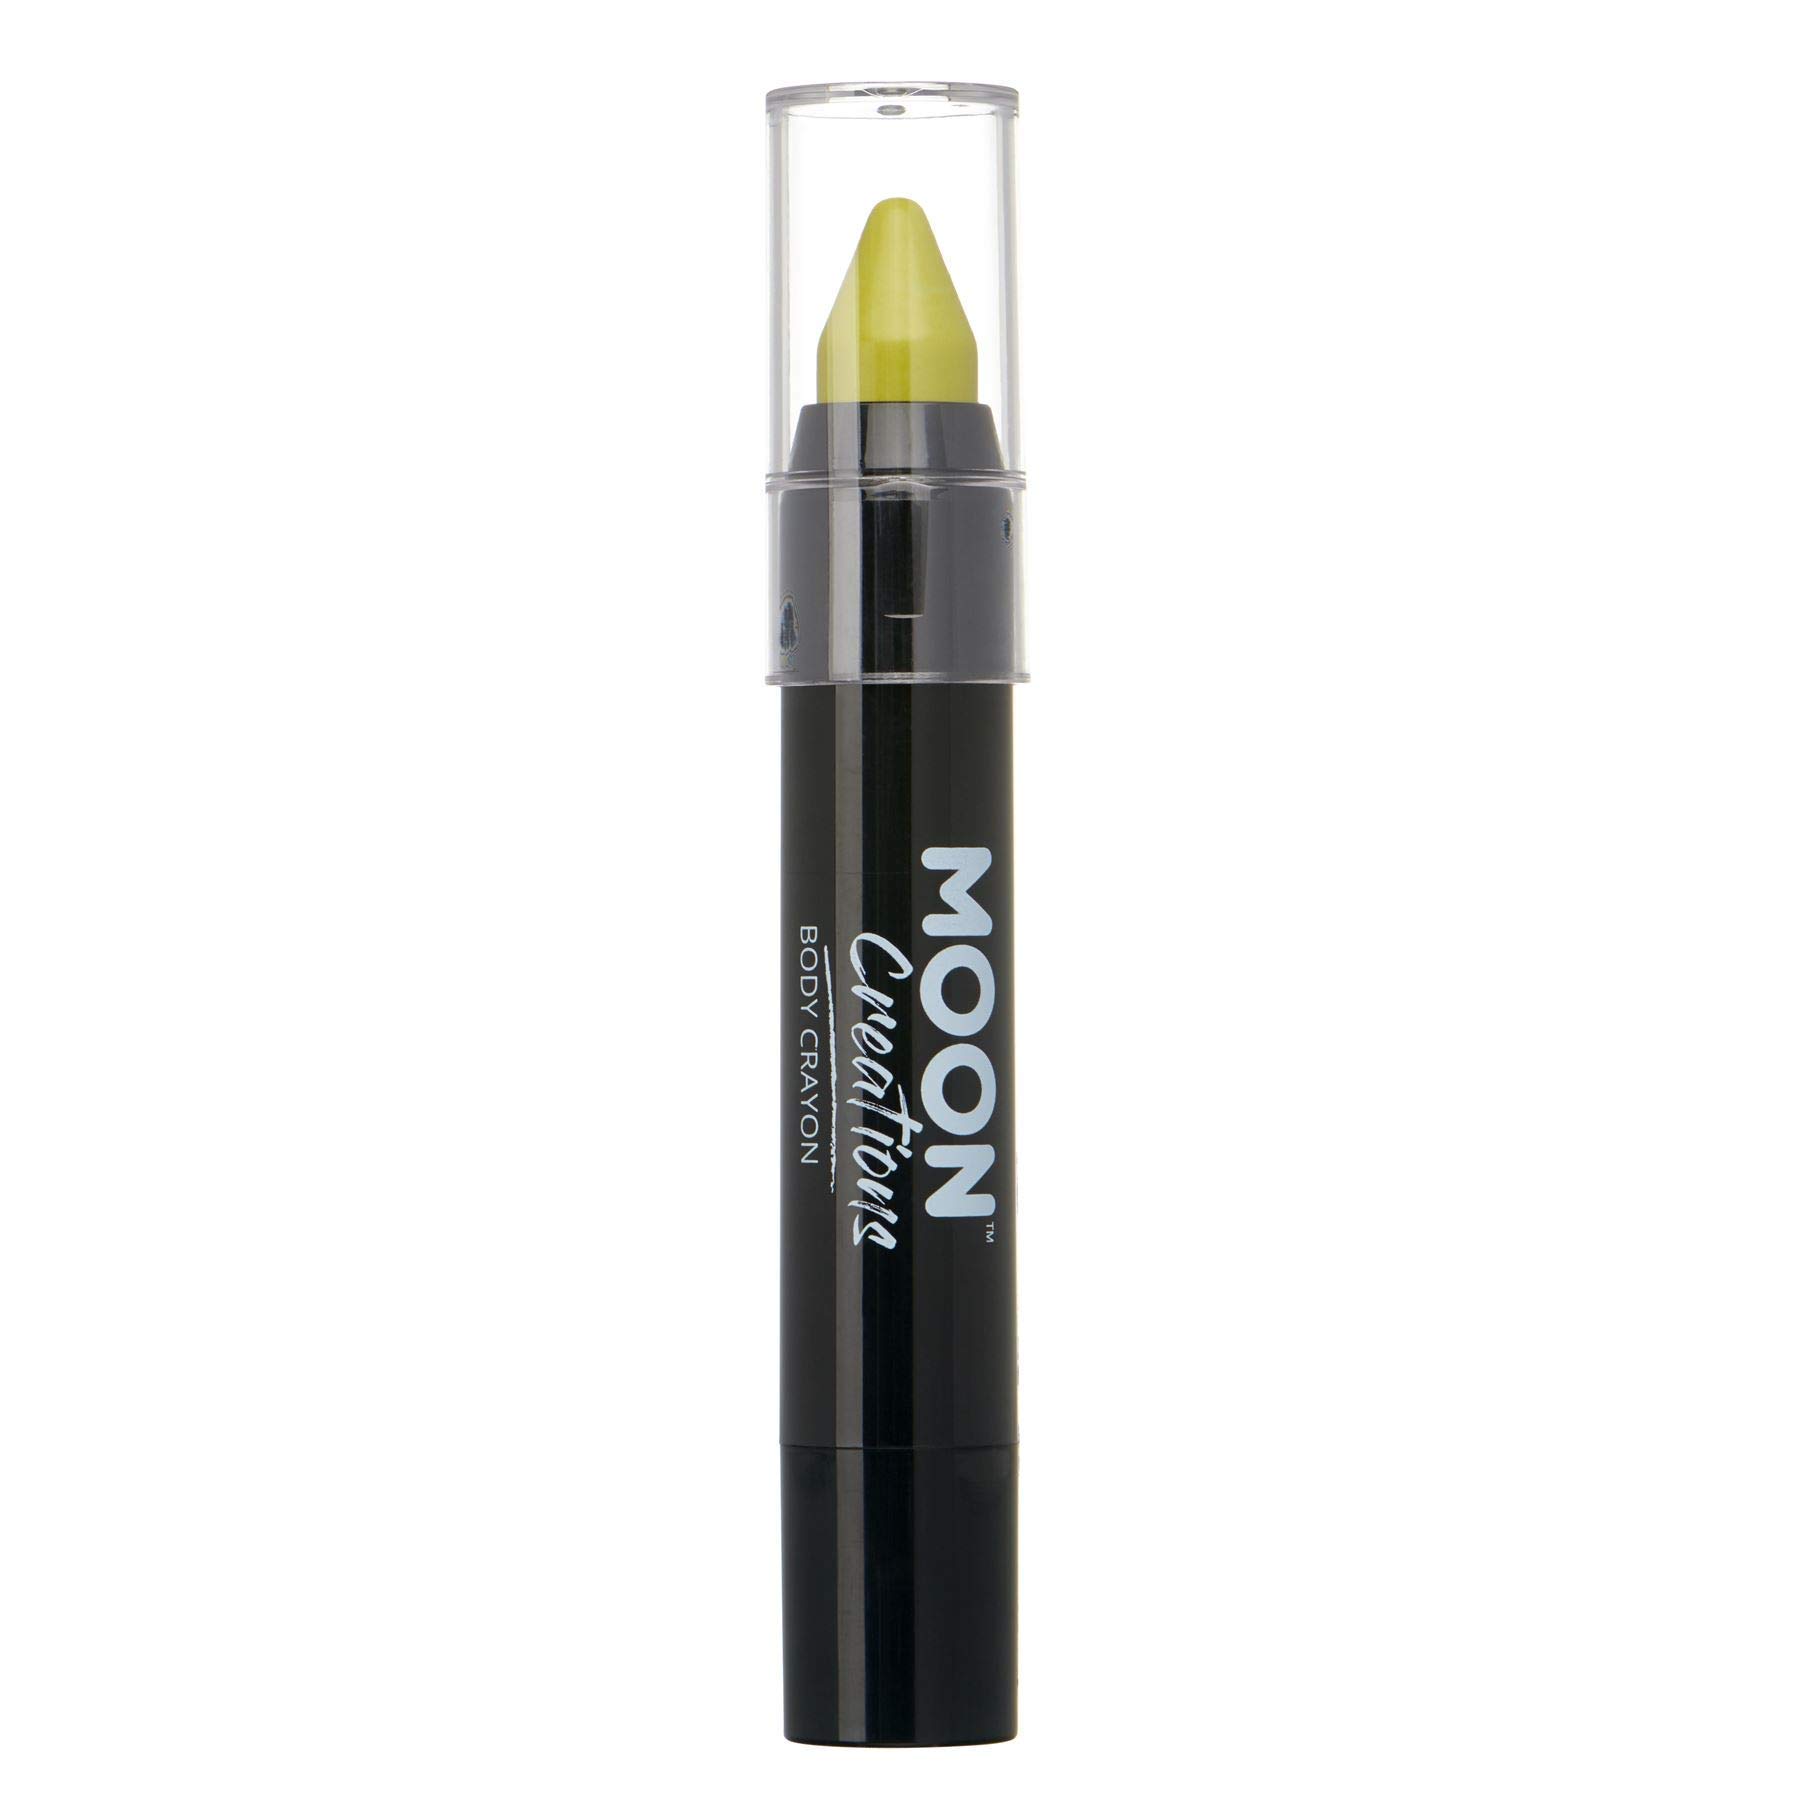 Face Paint Stick / Body Crayon Makeup for The Face & Body by Moon Creations - 0.12oz - Lime Green